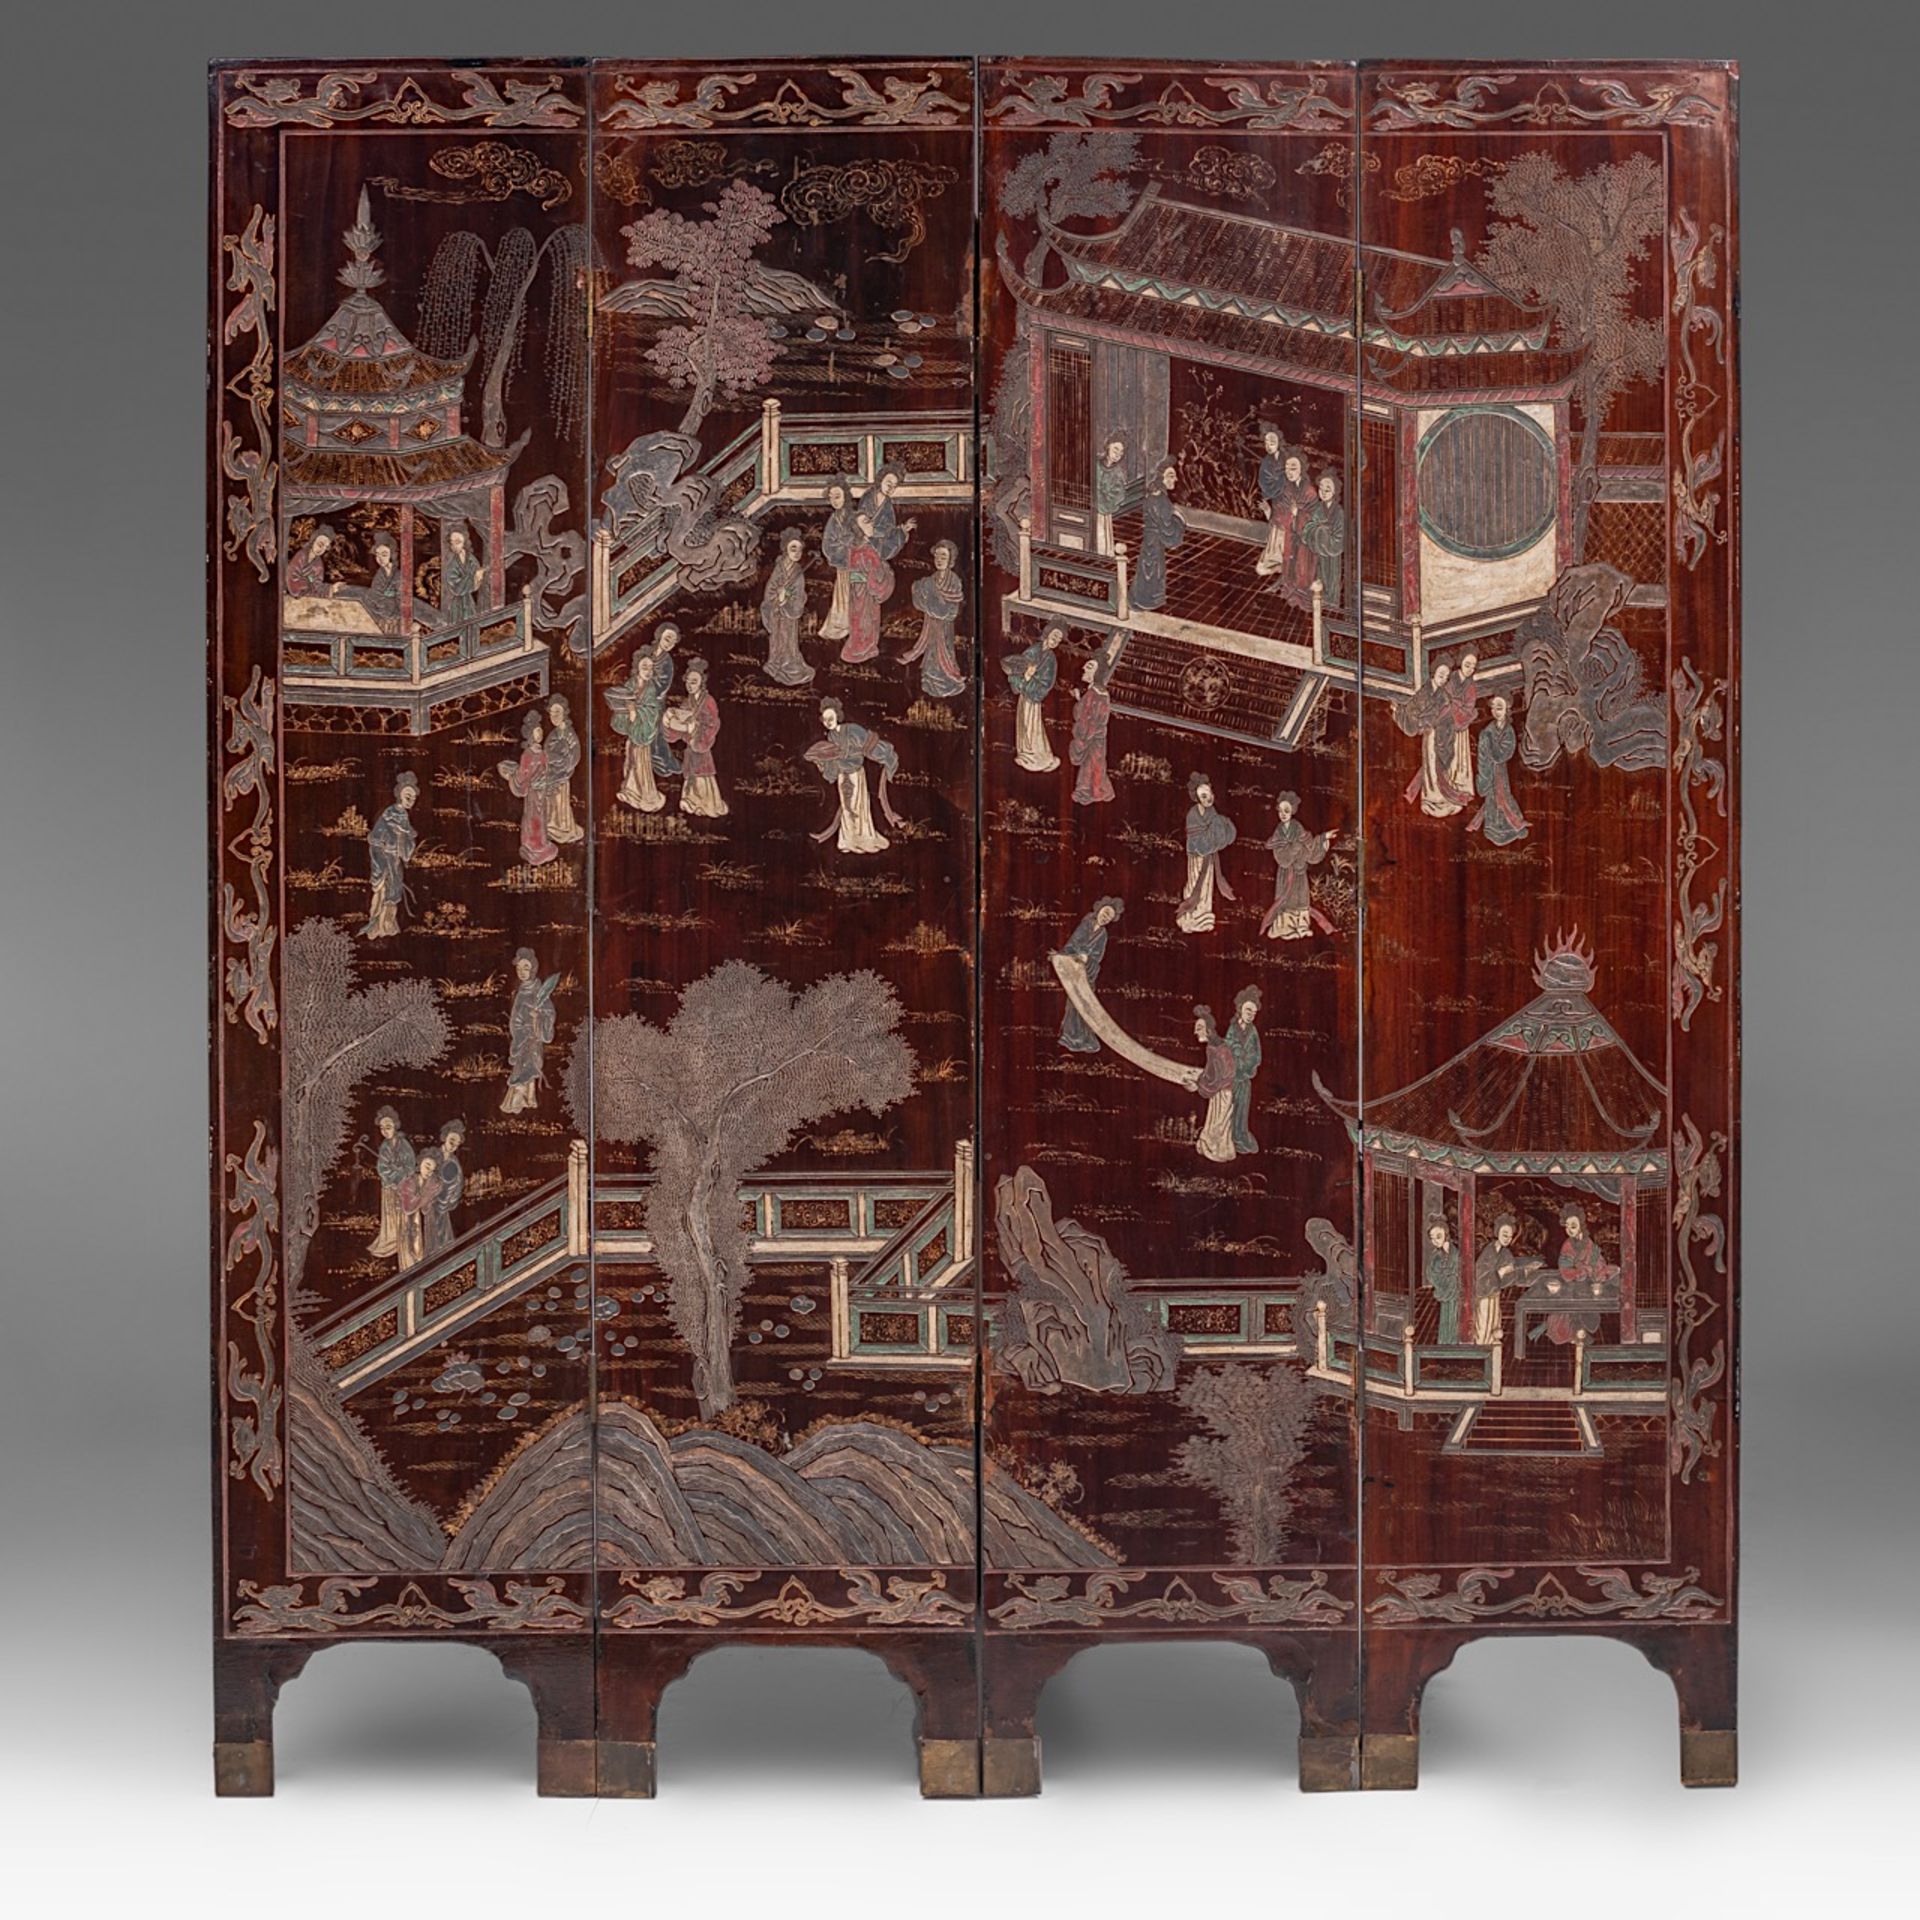 A Chinese coromandel lacquered four-panel chamber screen, late 18thC/19thC, H 162 - W 35,5 (each pan